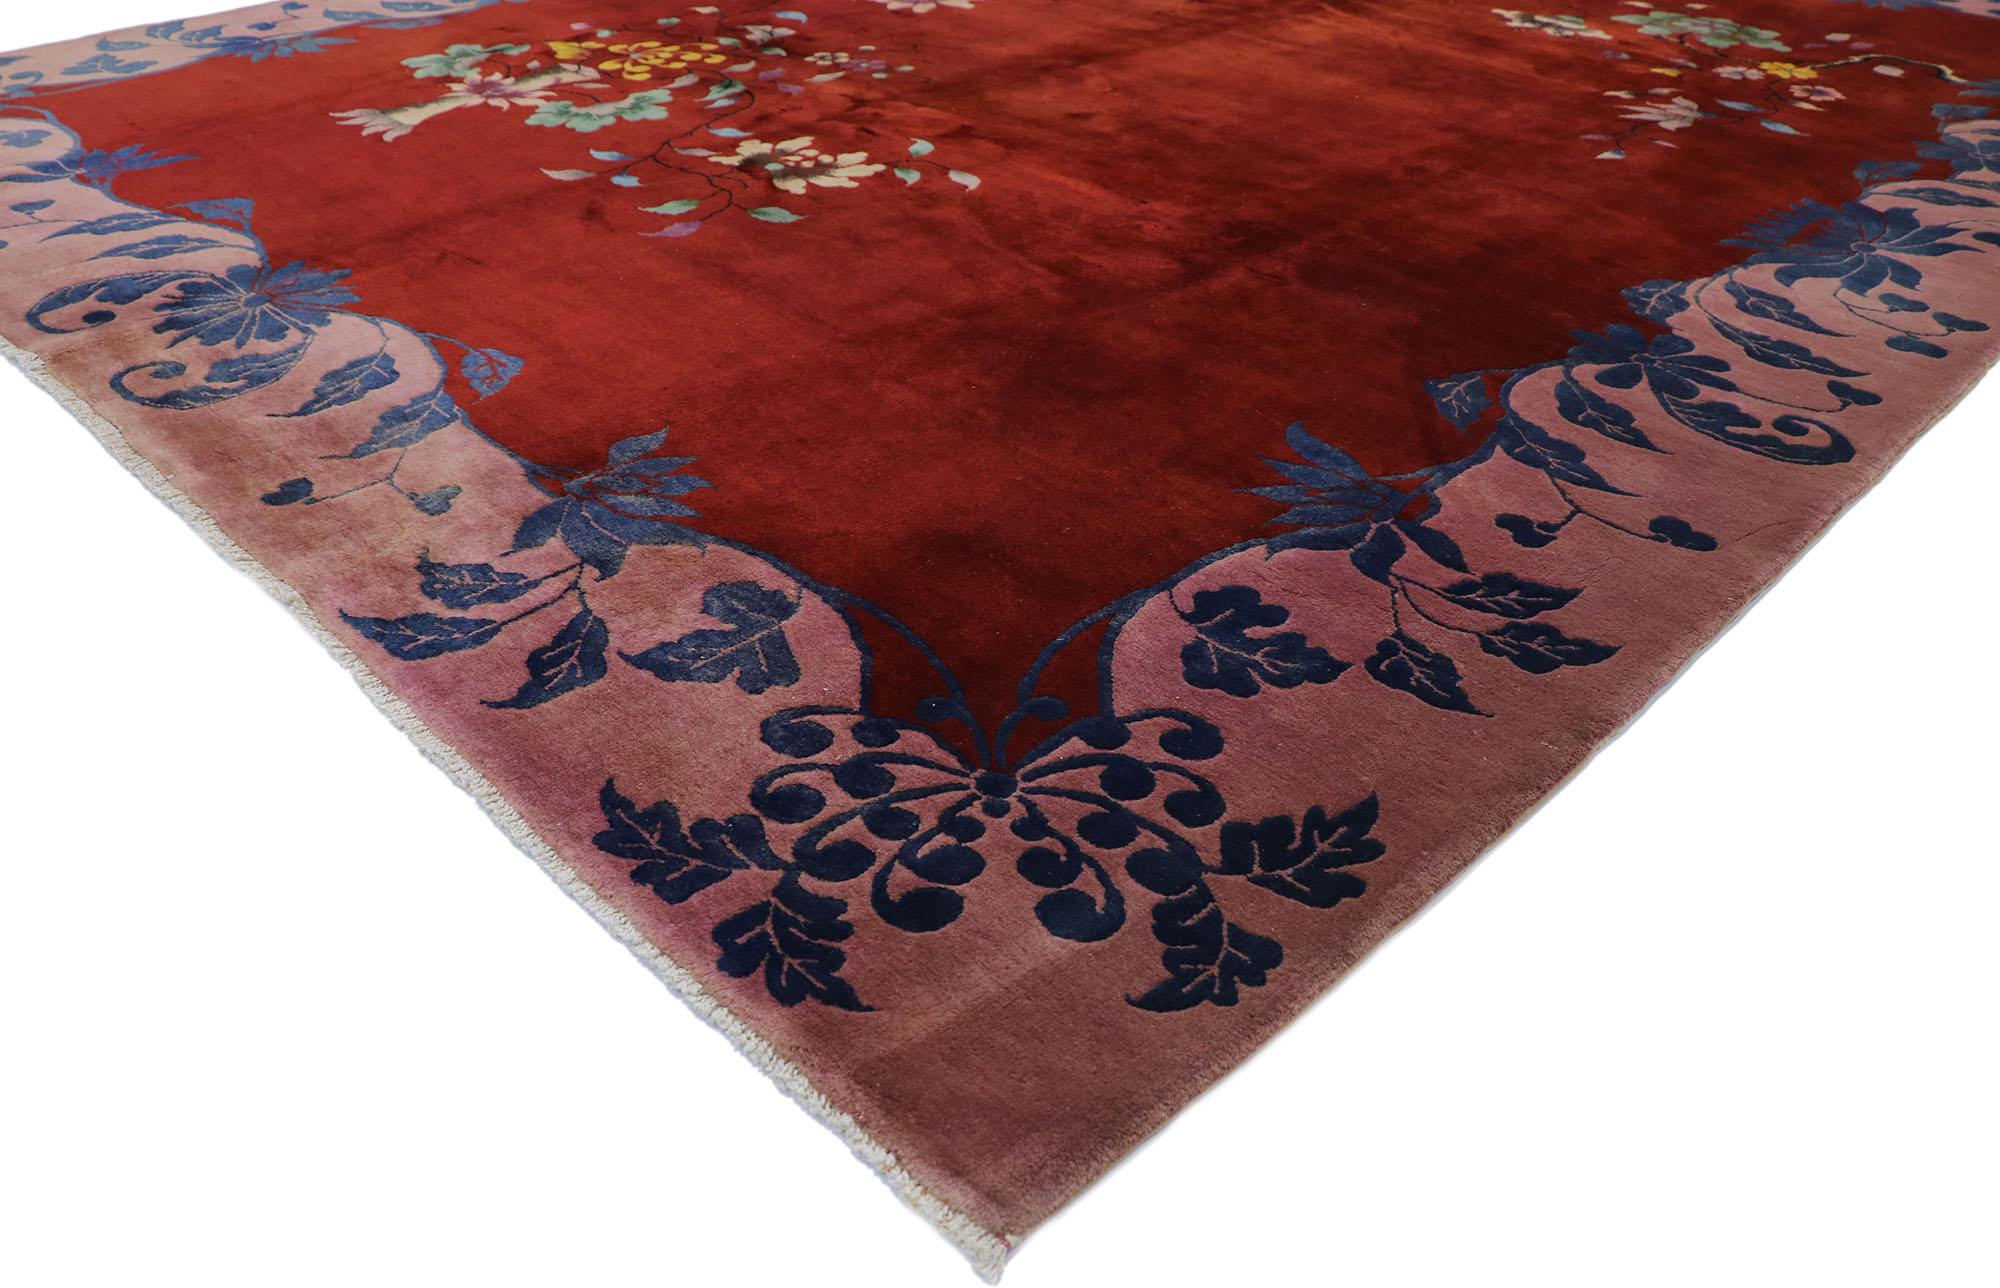 77626, antique Chinese Art Deco rug inspired by Walter Nichols 08'11 x 11'05. This hand knotted wool antique Chinese Art Deco rug features a color-blocked field and border scheme festooned with asymmetrical opulent frondescence and florals breaking